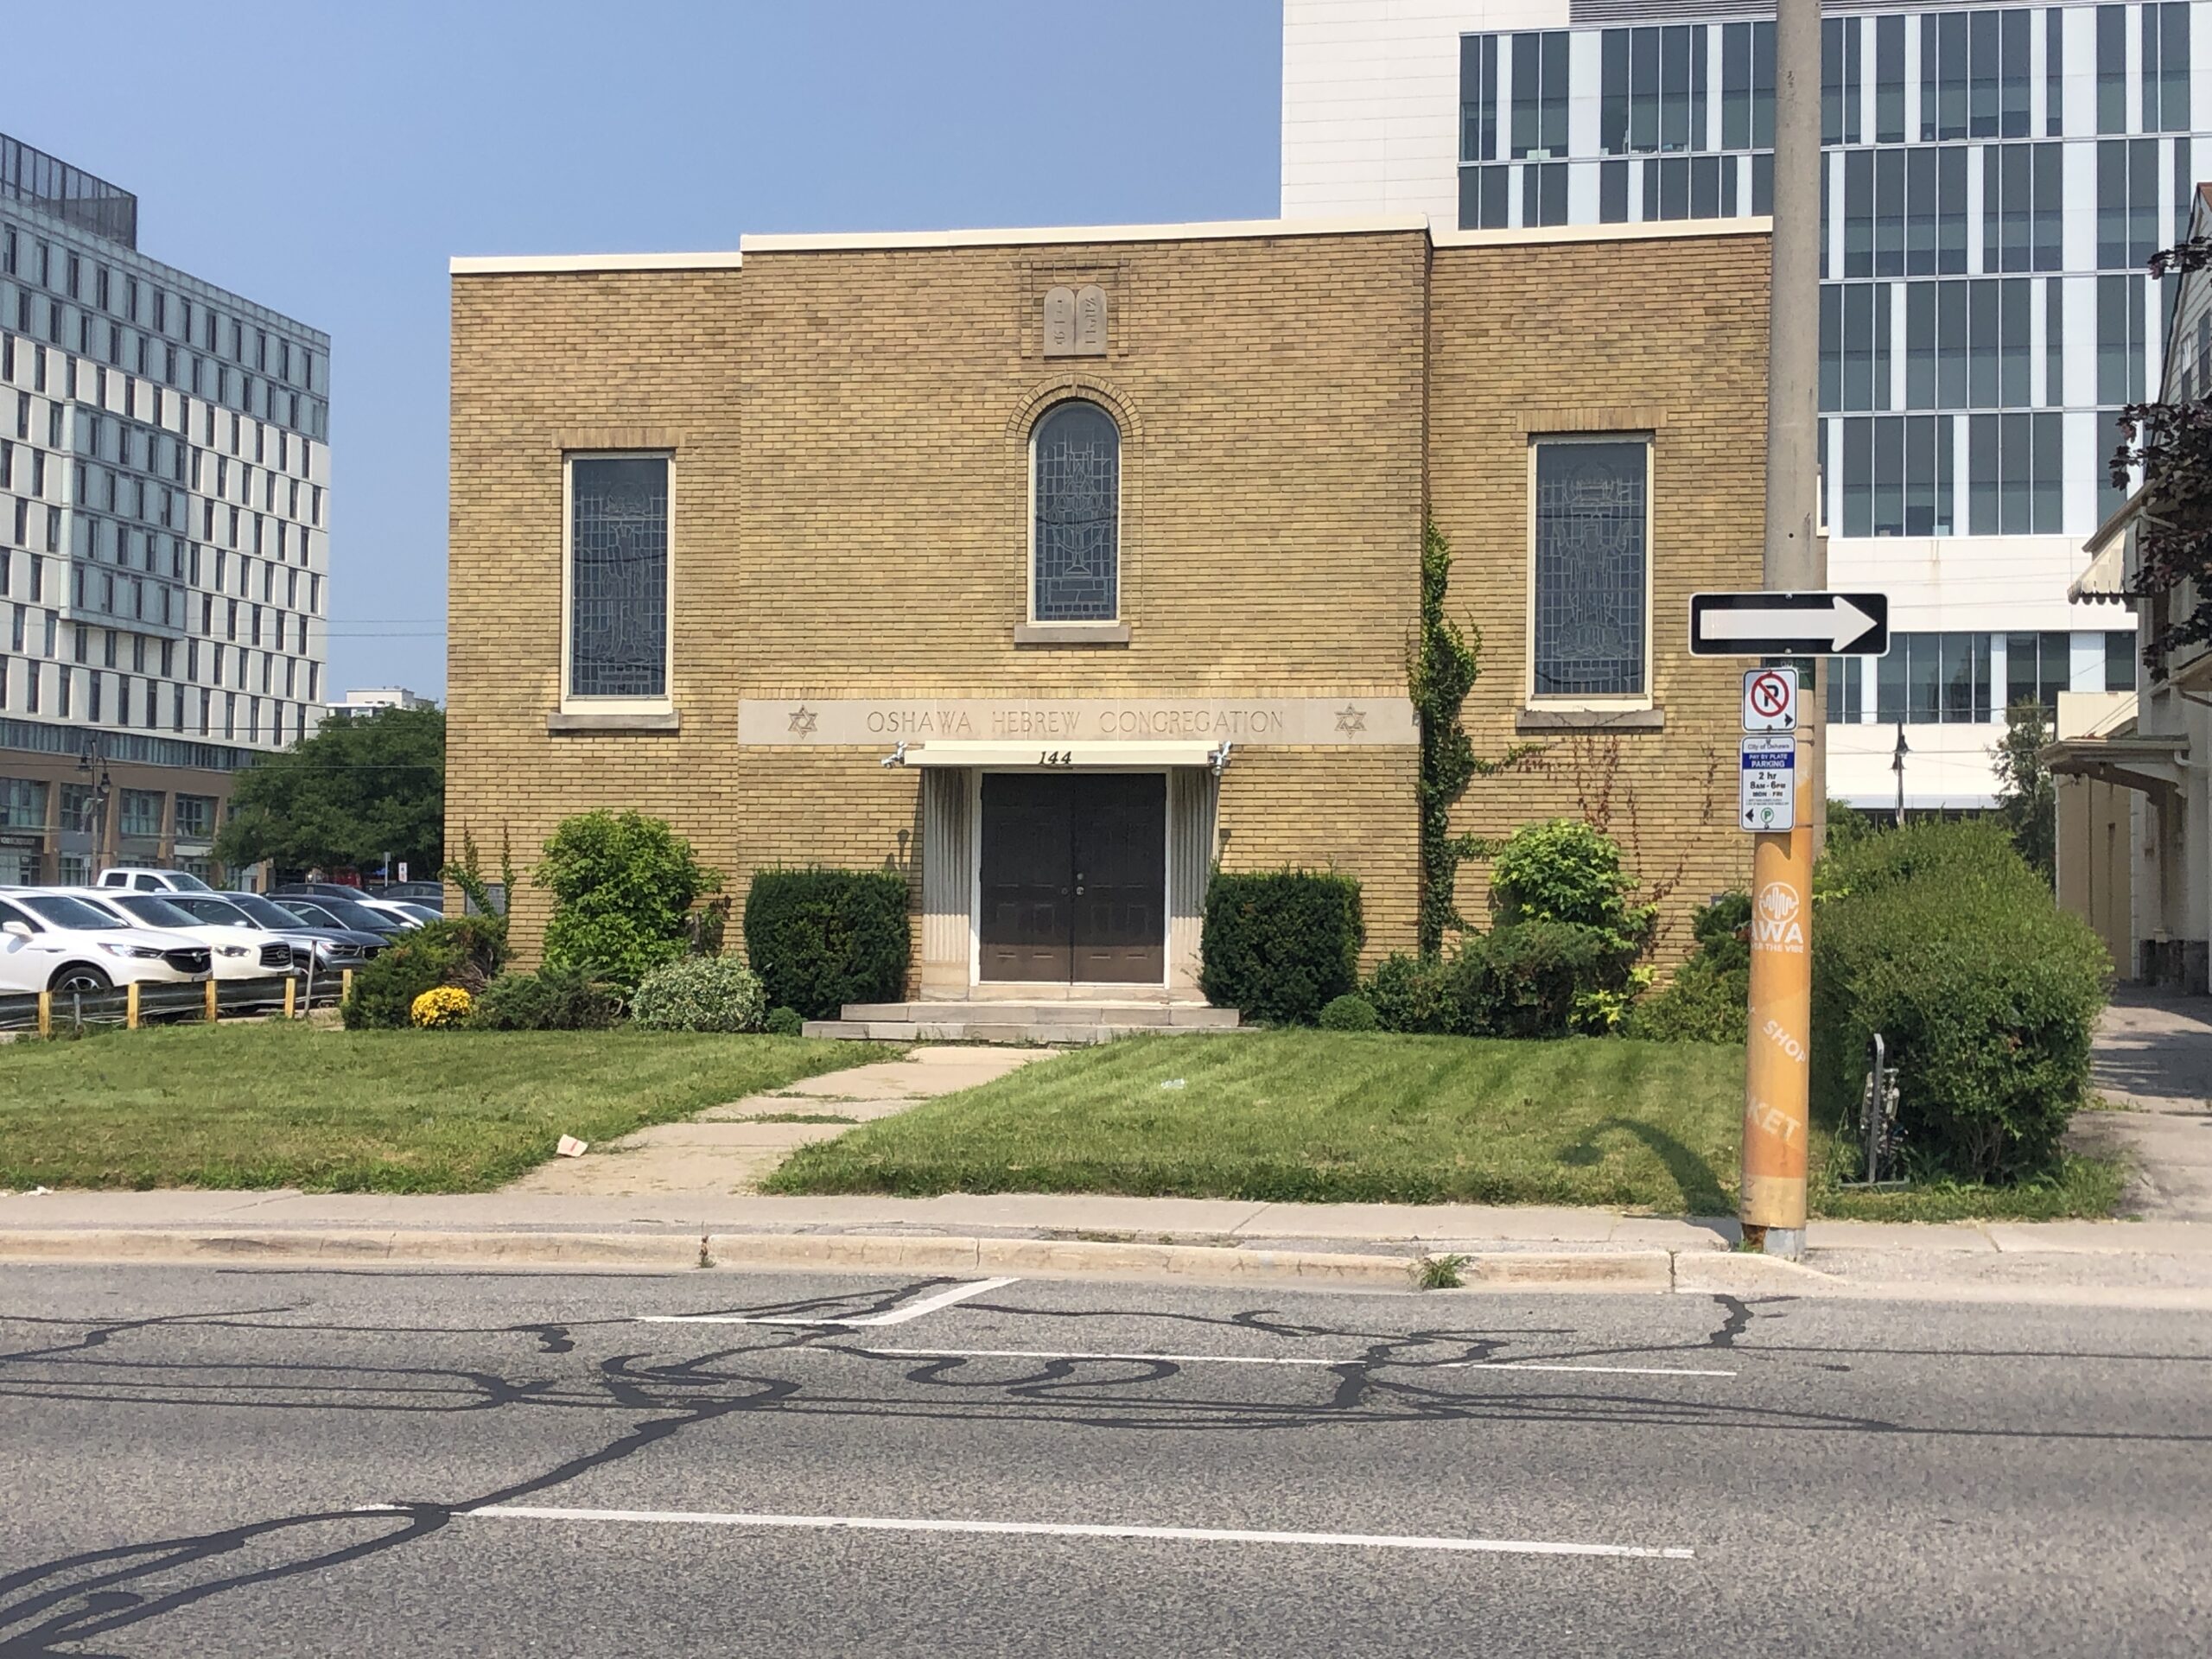 Large brick building, three stained glass windows, and the words 'Oshawa Hebrew Congregation' carved above the door